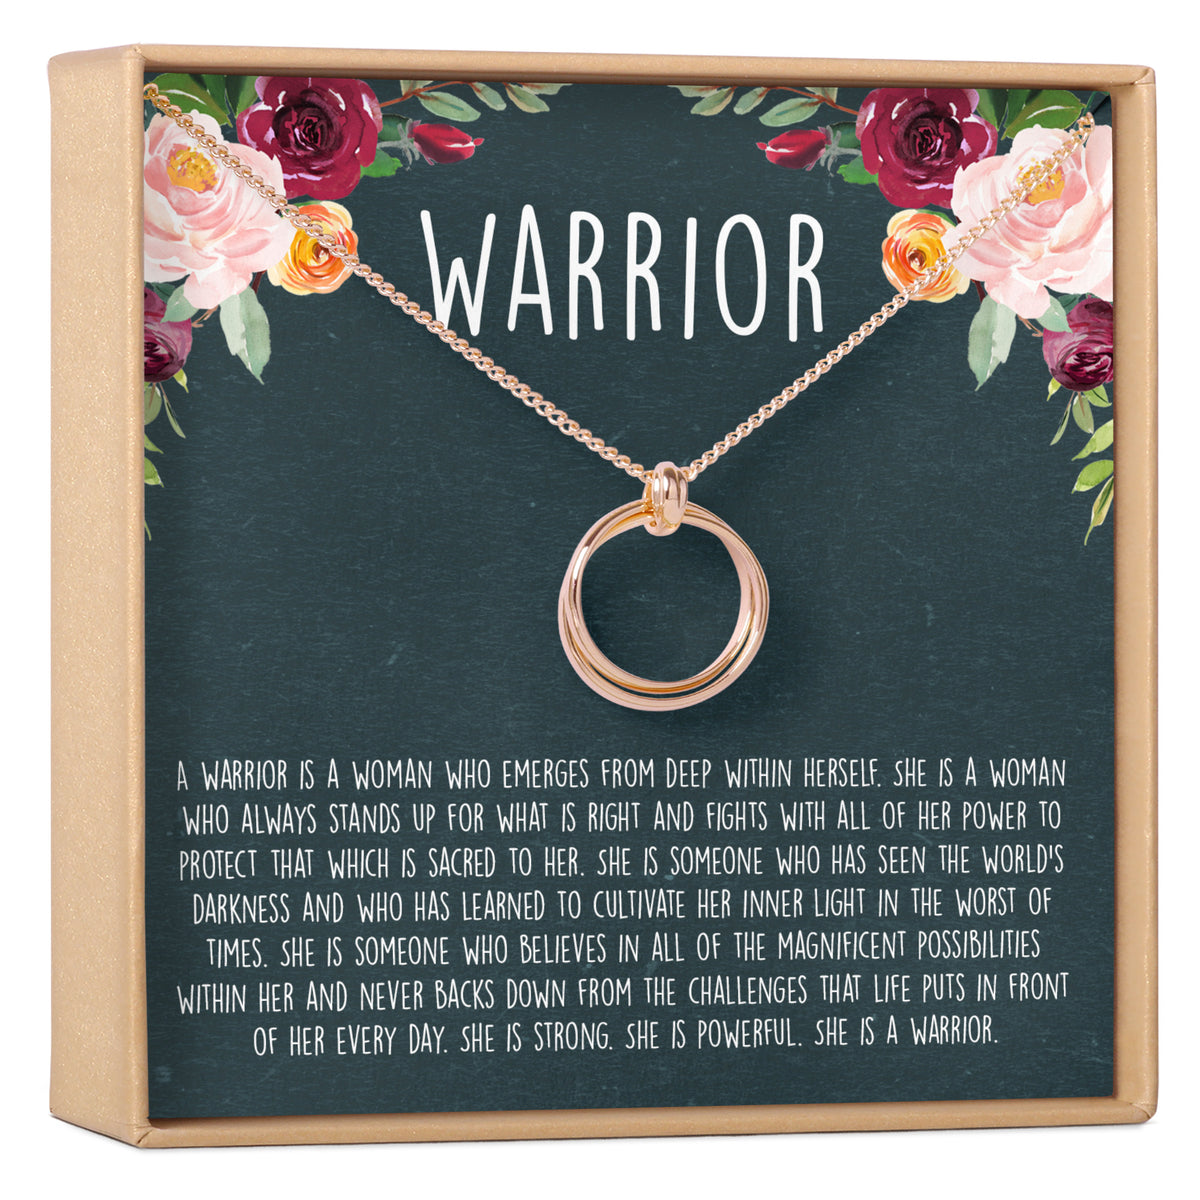 Inner Wisdom Necklace by Sonia Jhas